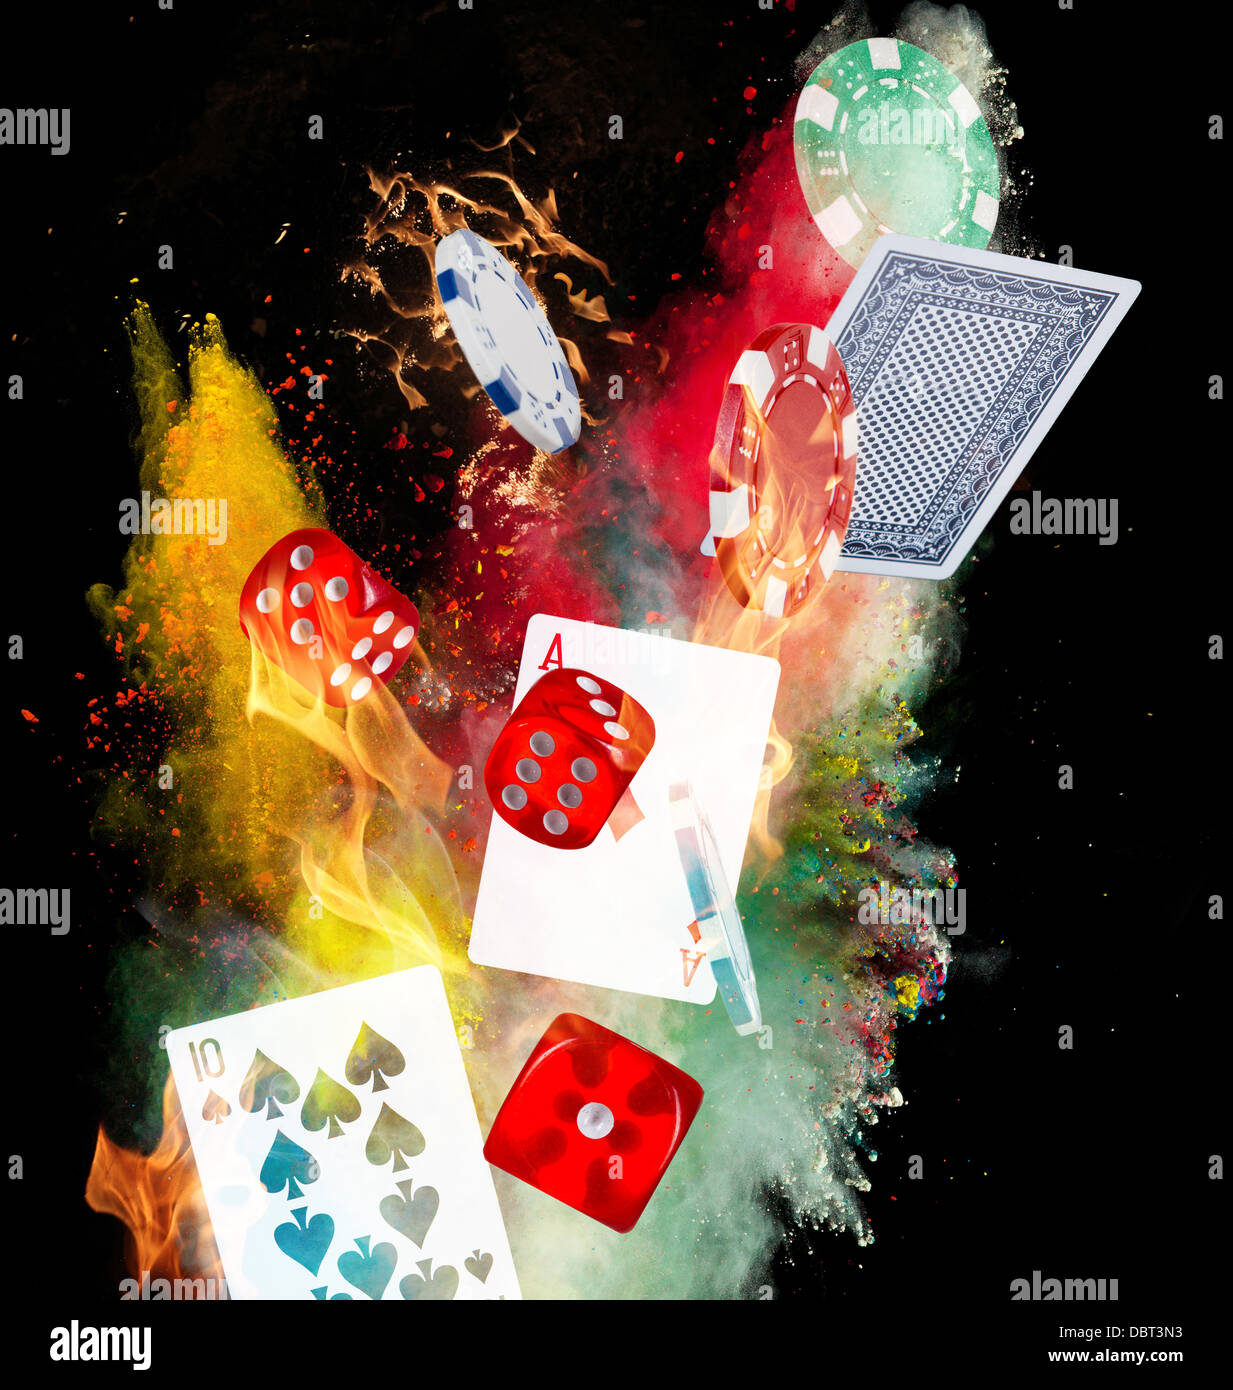 Poker chips, cubes and playing cards in motion Stock Photo